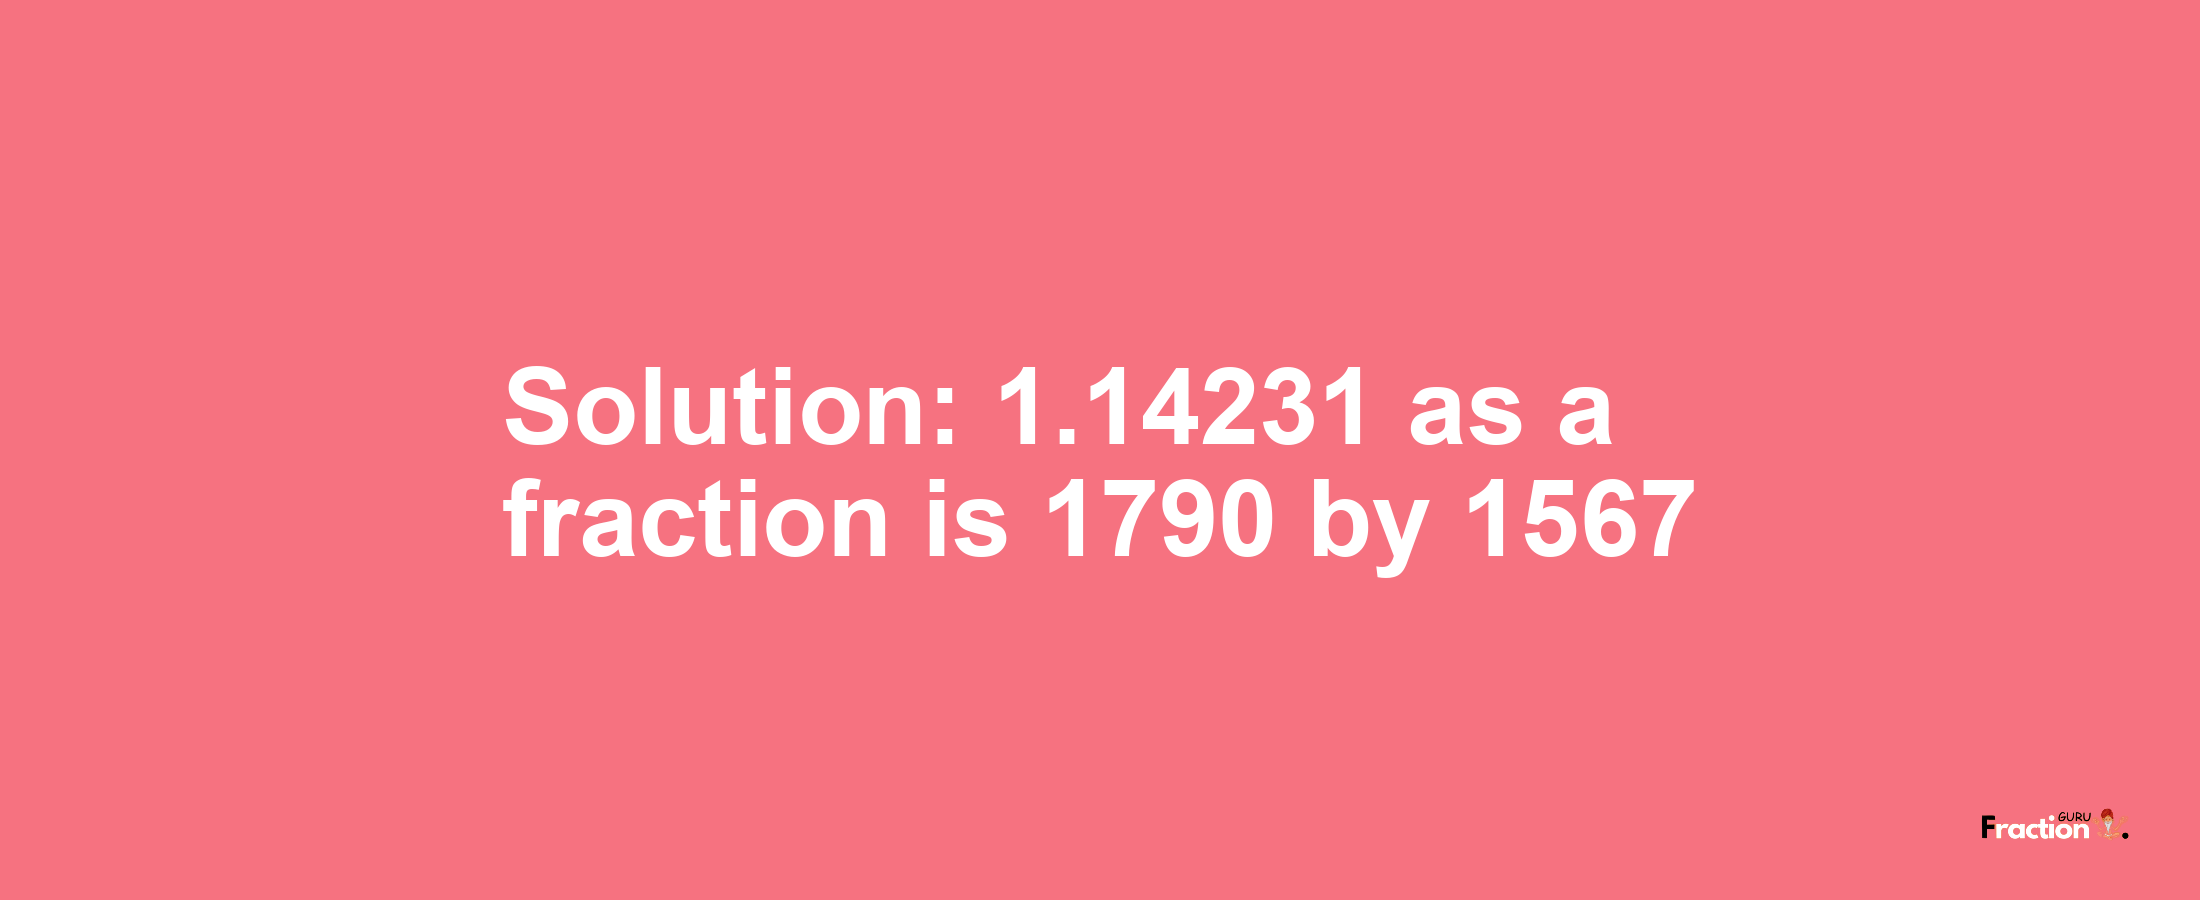 Solution:1.14231 as a fraction is 1790/1567